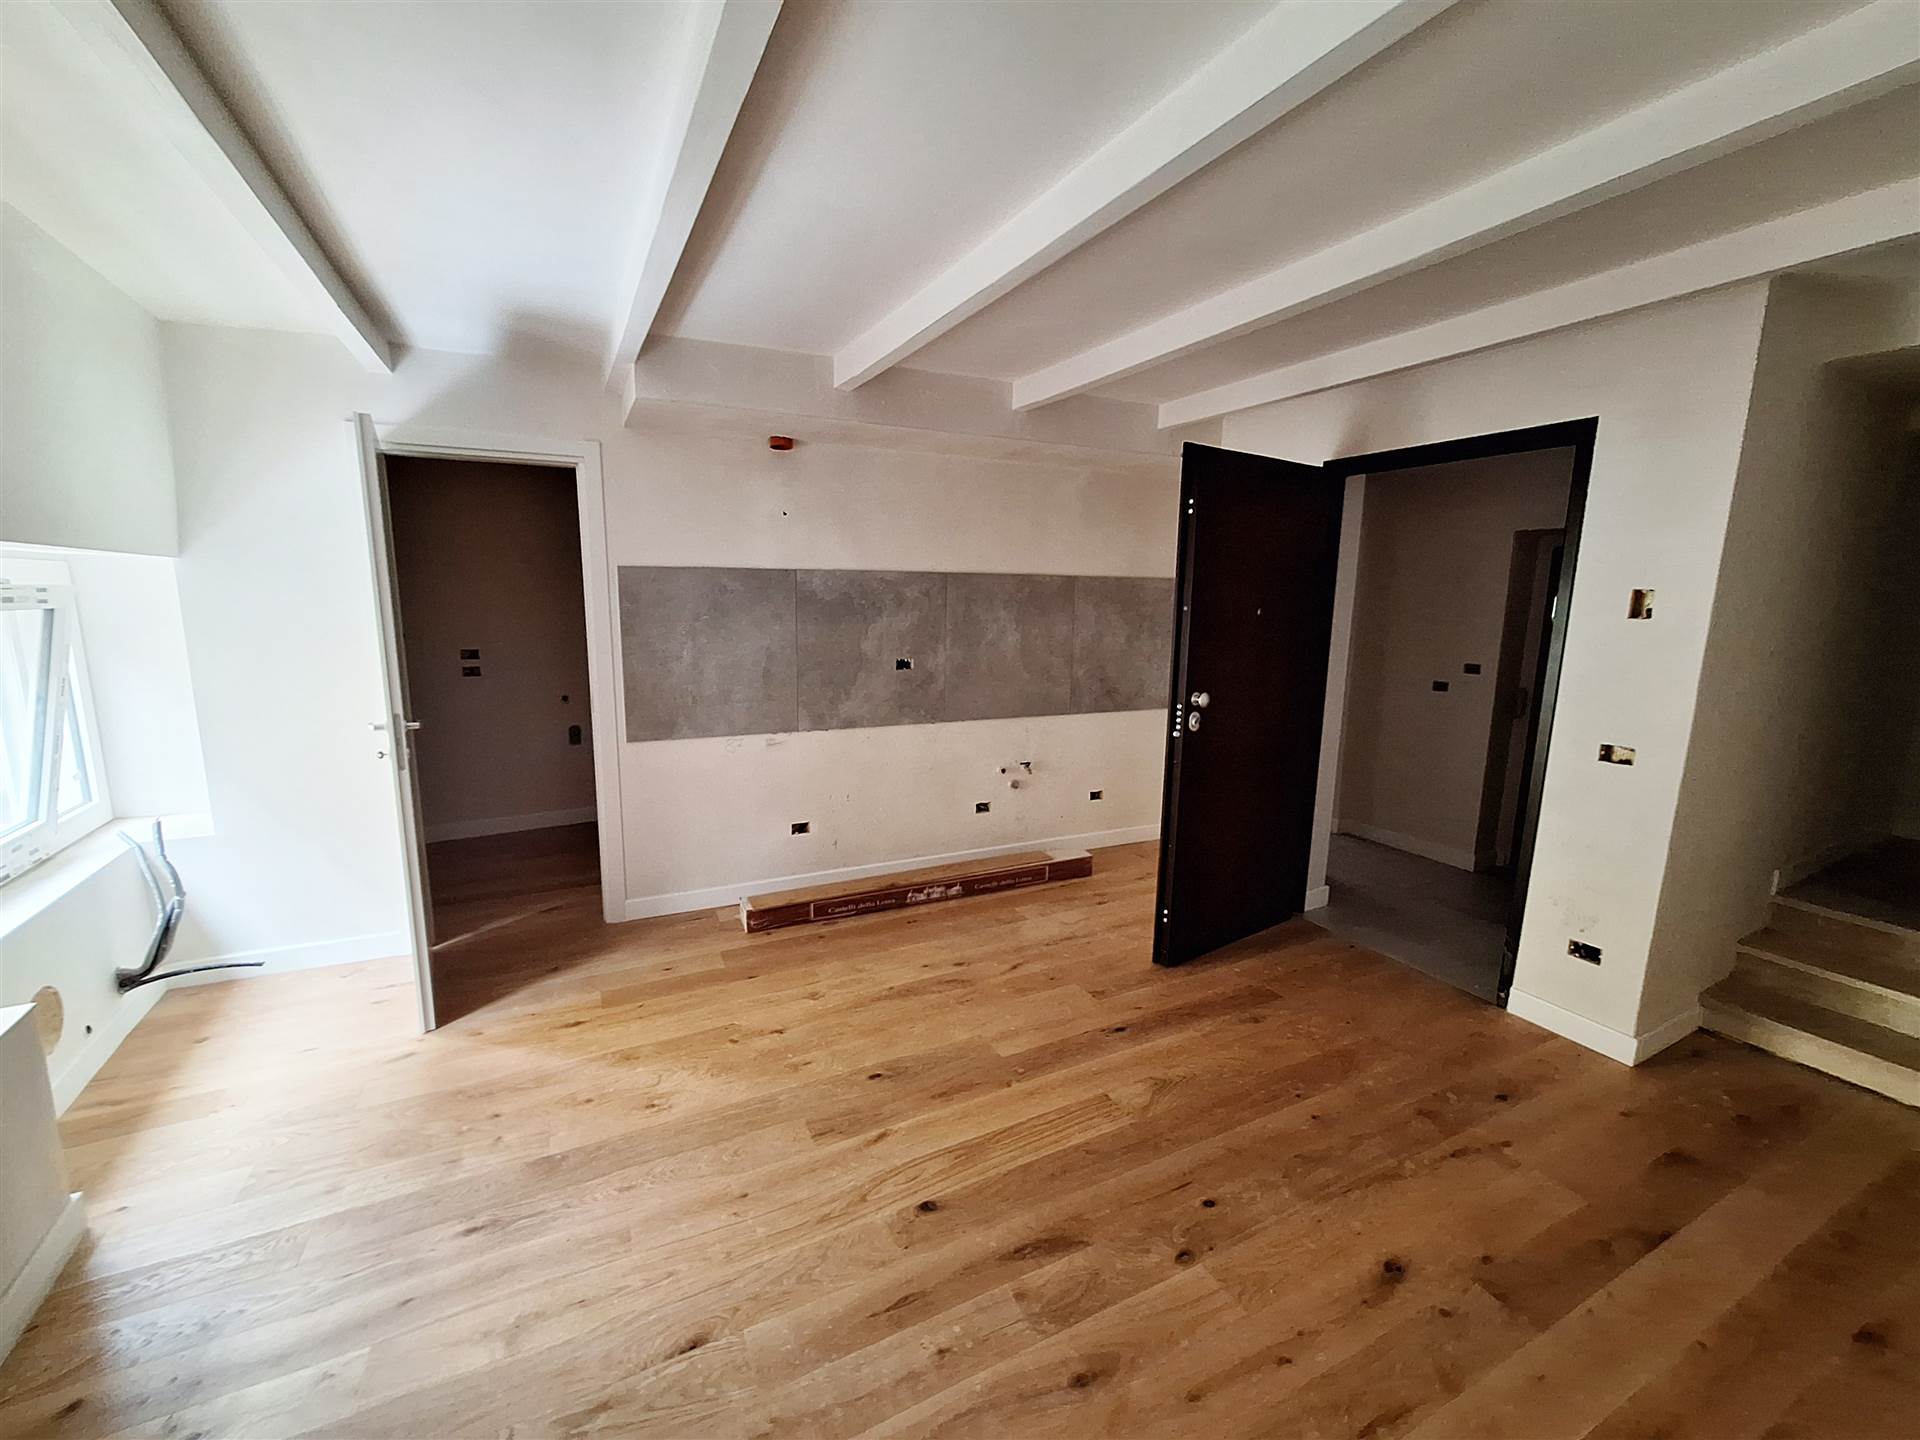 COMUNALE, FIRENZE, Apartment for sale of 77 Sq. mt., Restored, Heating Individual heating system, Energetic class: G, Epi: 276 kwh/m2 year, placed at 